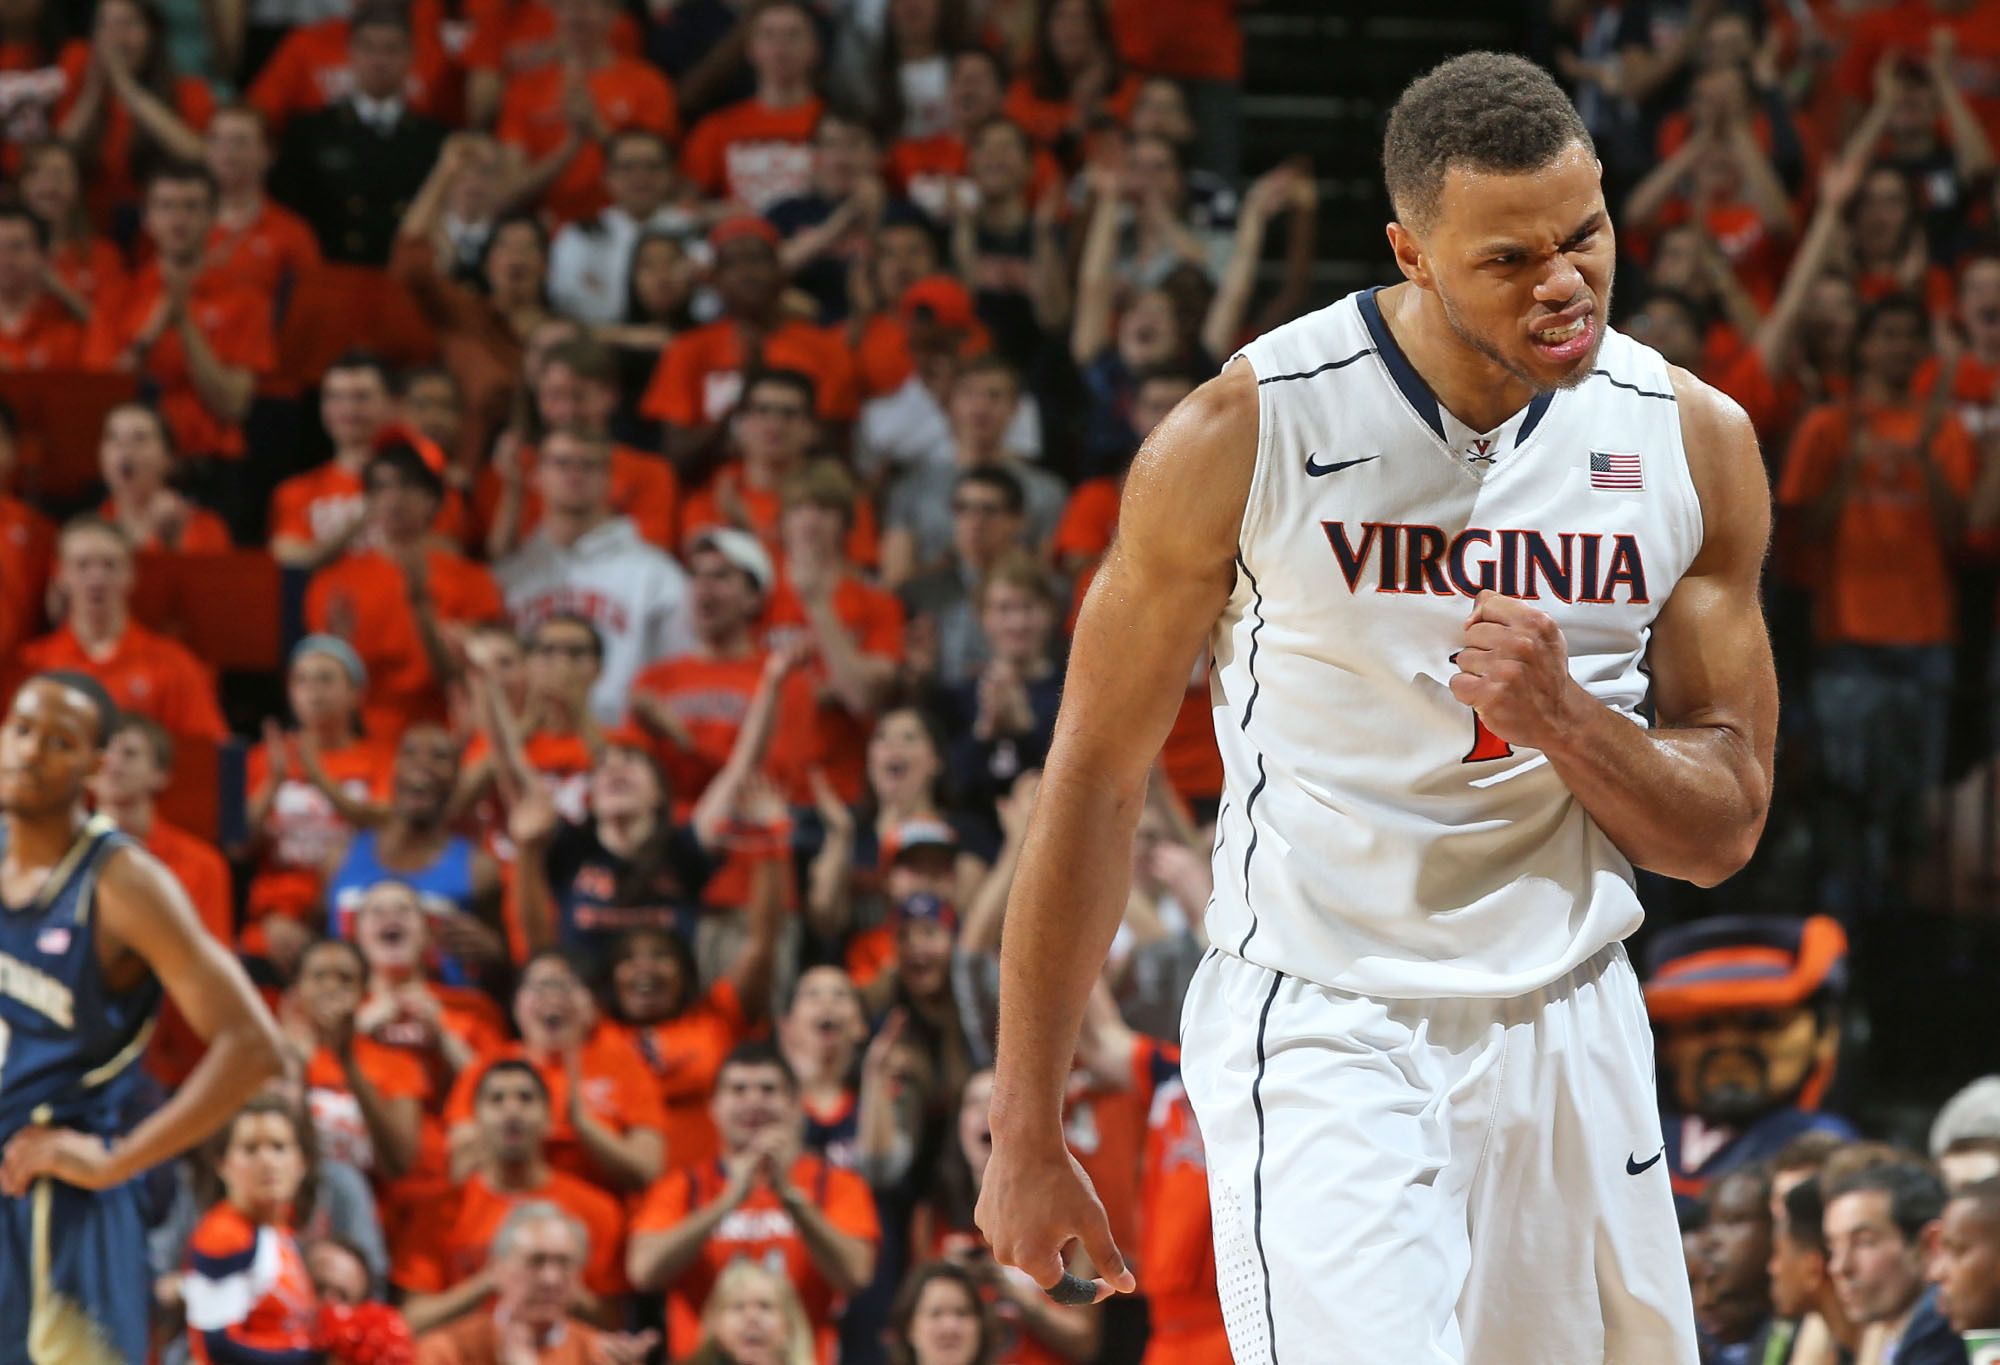 The 'Sixth Man' Gears Up for Saturday's 'Hoos vs. 'Cuse Faceoff